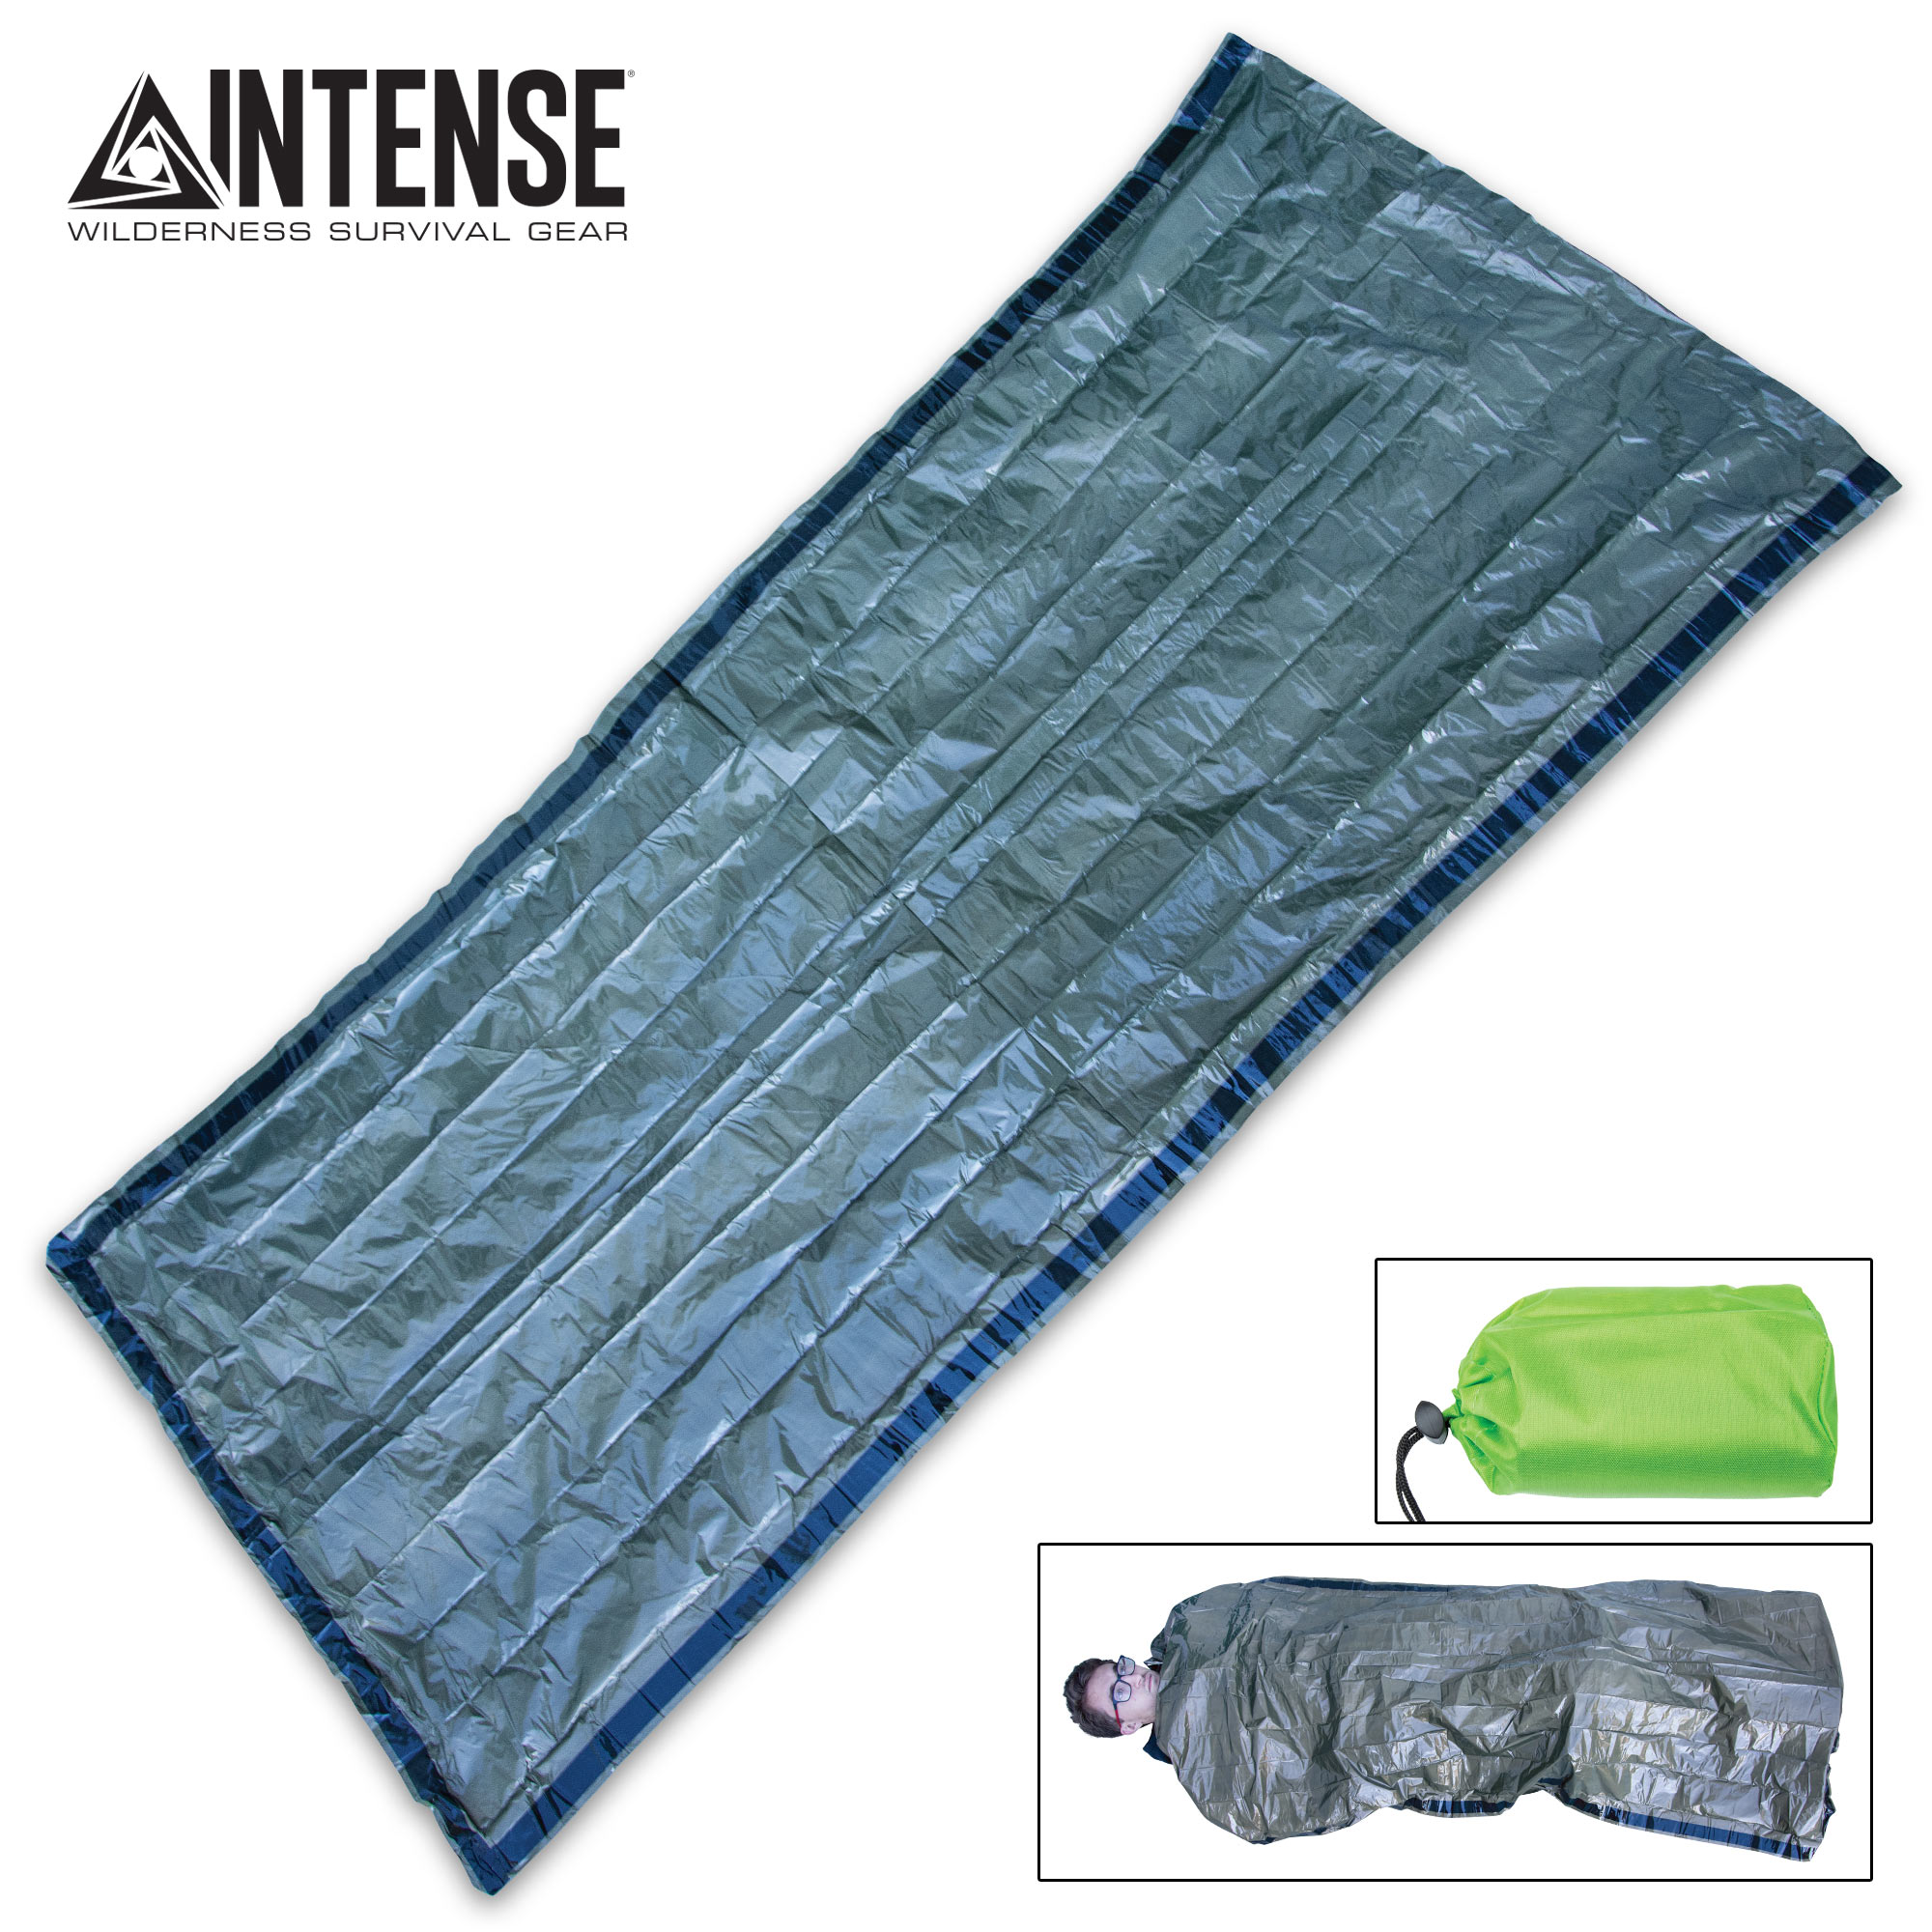 Intense Bivy Emergency Sleeping Bag With Pouch - Mylar Construction, Reflects Body Heat, Water And Windproof - 7x3